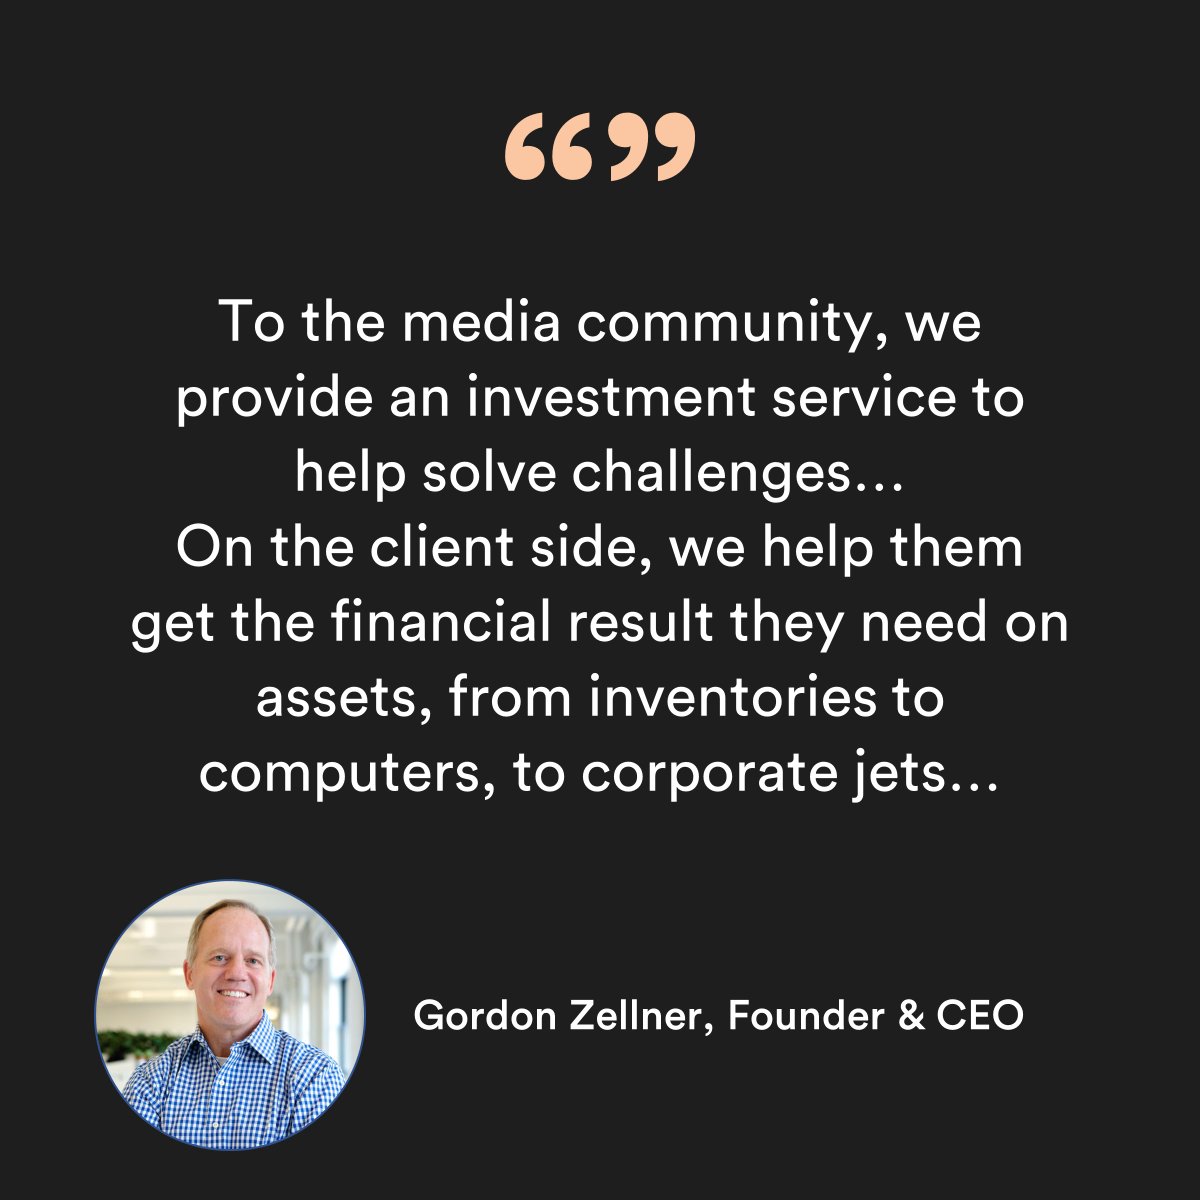 Gordon Zellner, our Founder & CEO, sat down with @advertisingweek for their AW360 podcast to discuss the #mediatrade industry and our #financialsolutions offered to the media and brand communities. Listen here spoti.fi/3J2BIAH #mediastrategy #ROIstrategies #brandstrategy